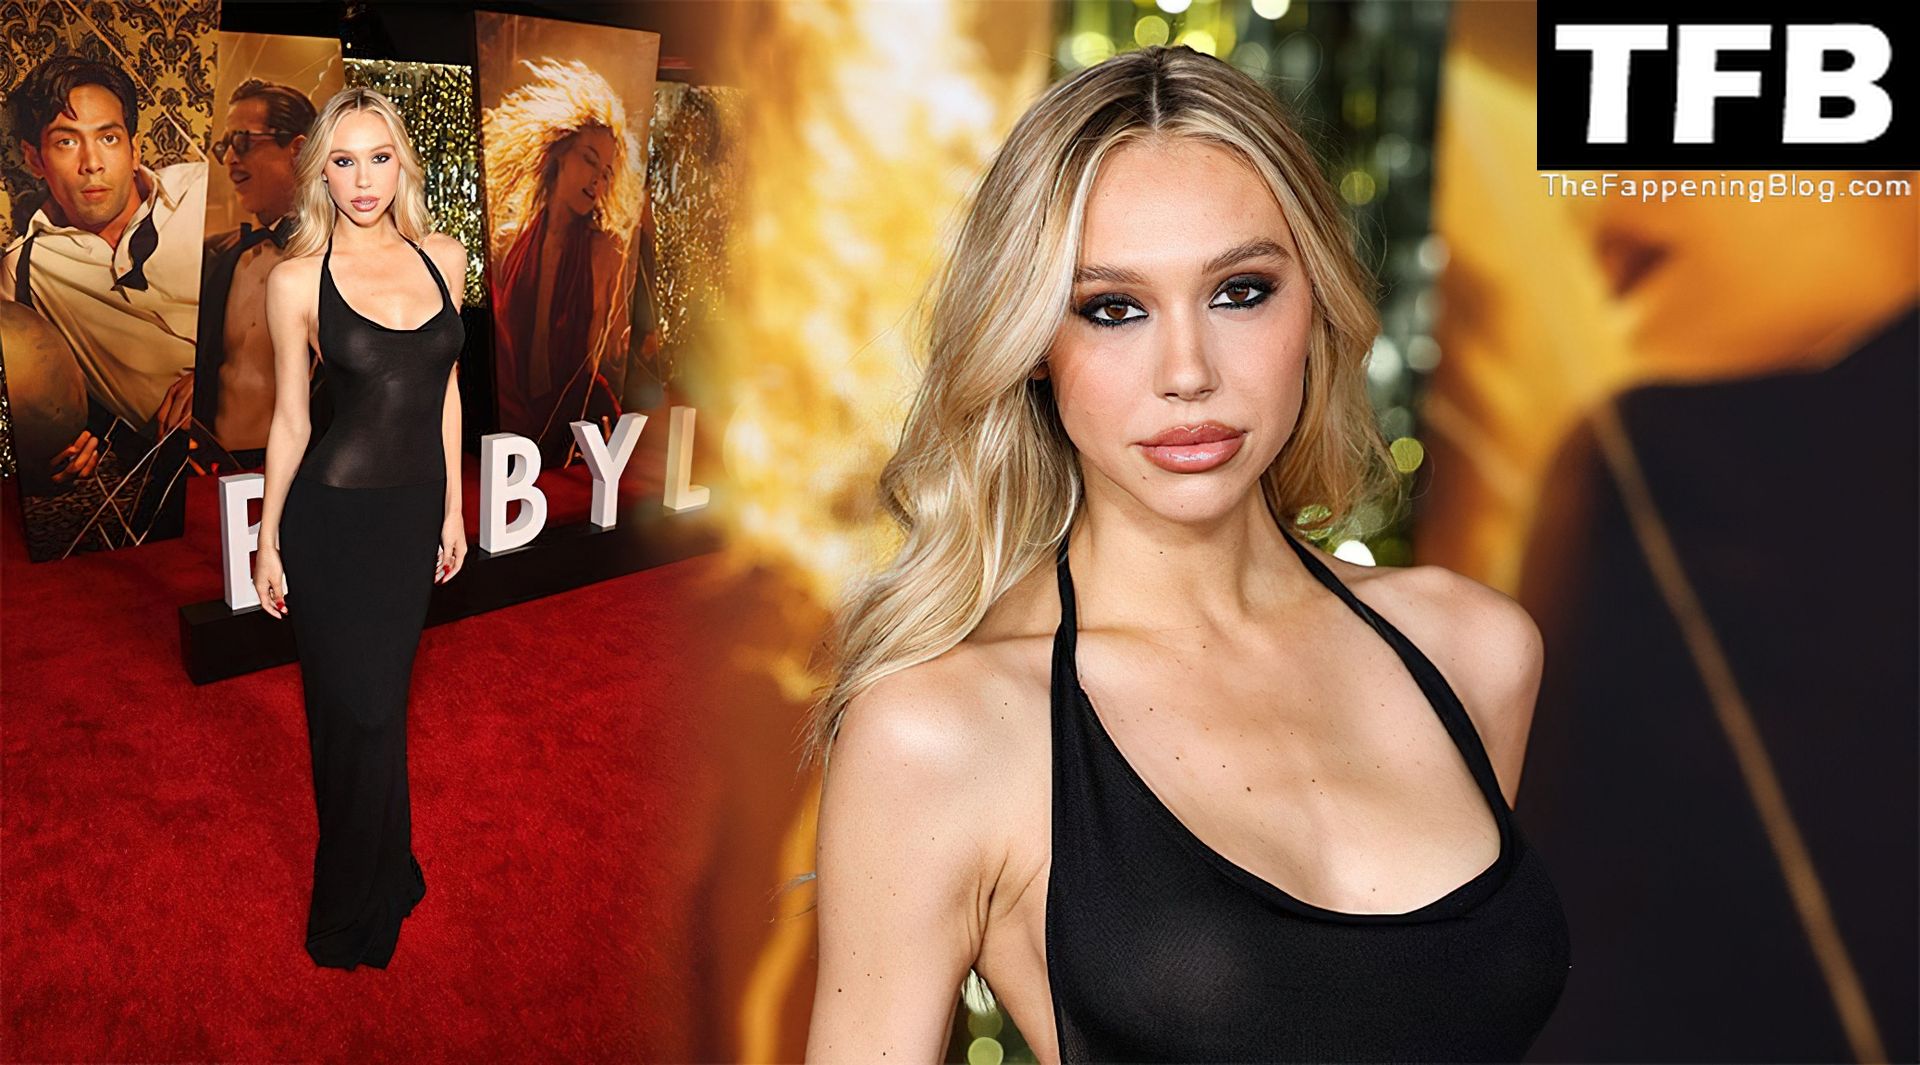 Alexis Ren Displays Her Slender Figure at the Global Premiere Screening of Paramount Pictures ‘Babylon’ in LA (44 Photos)